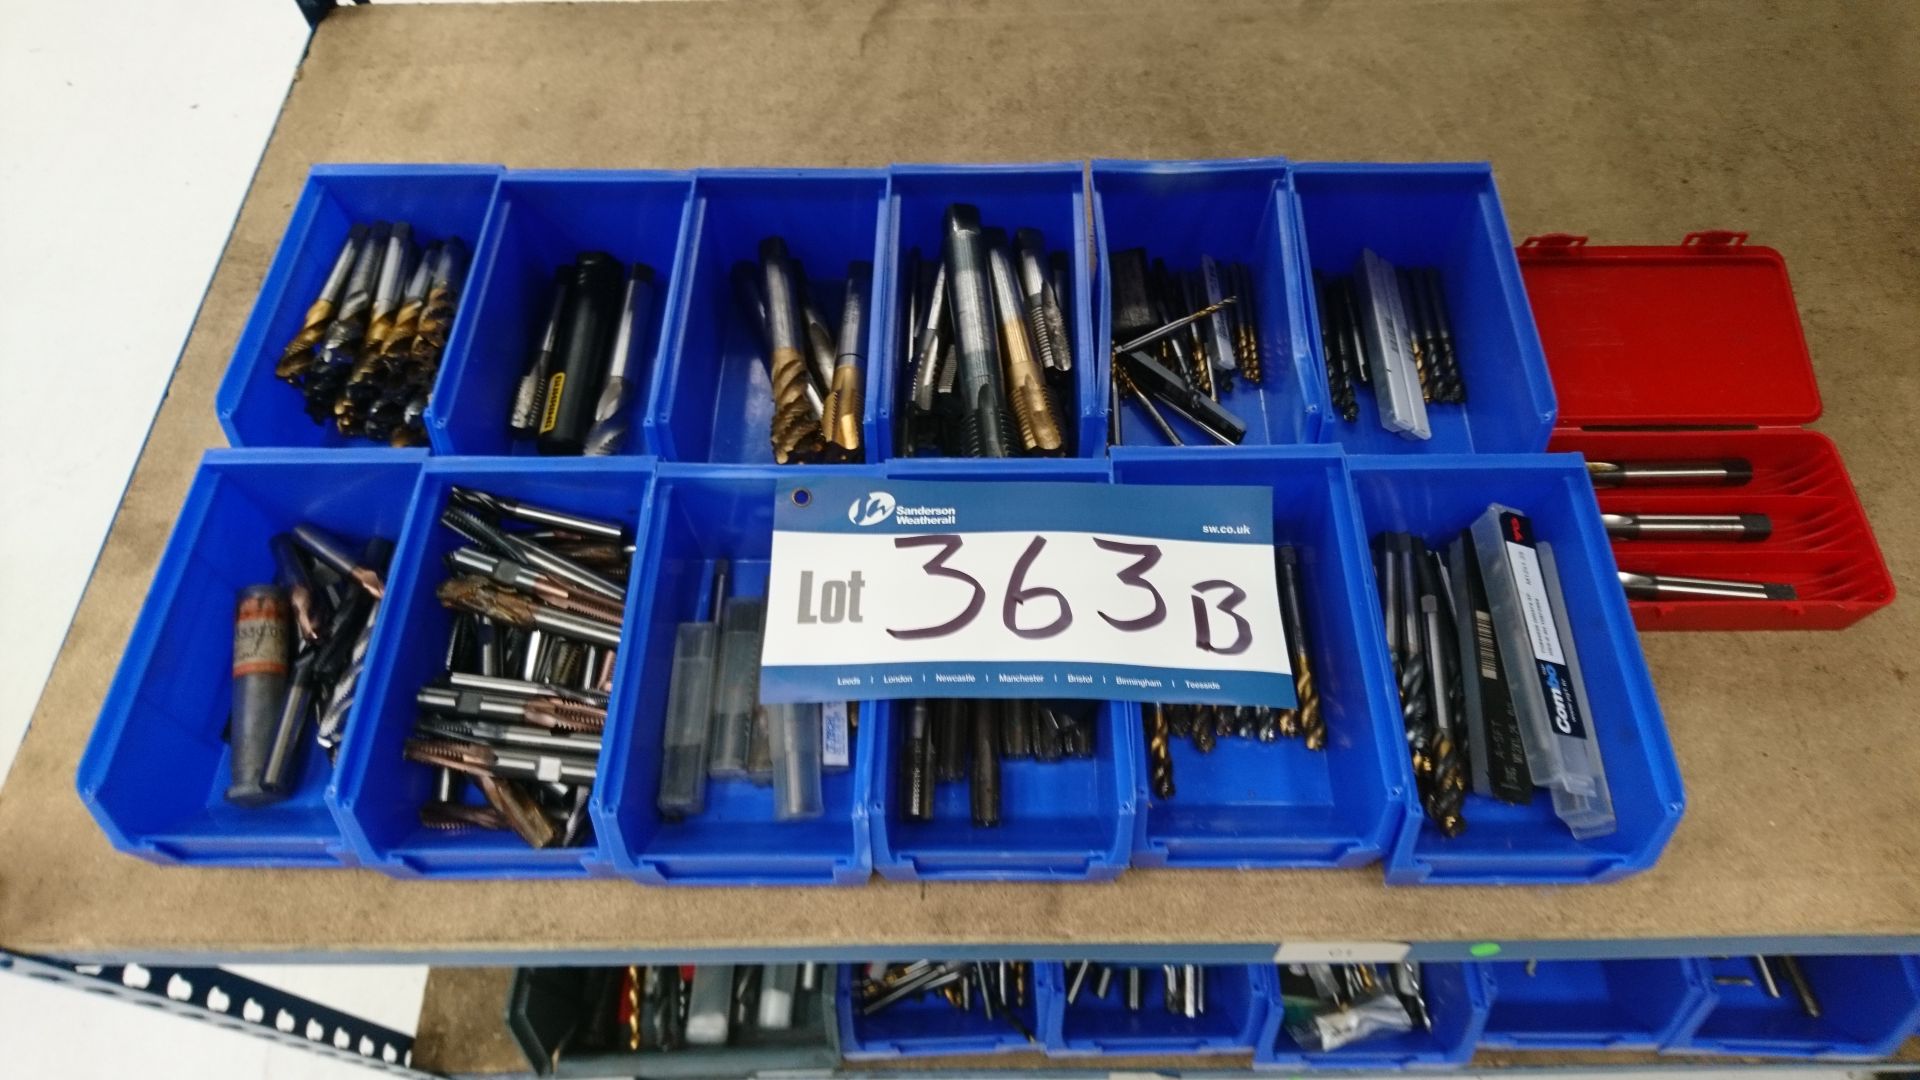 Quantity of Metric Taps as set out in lin bins